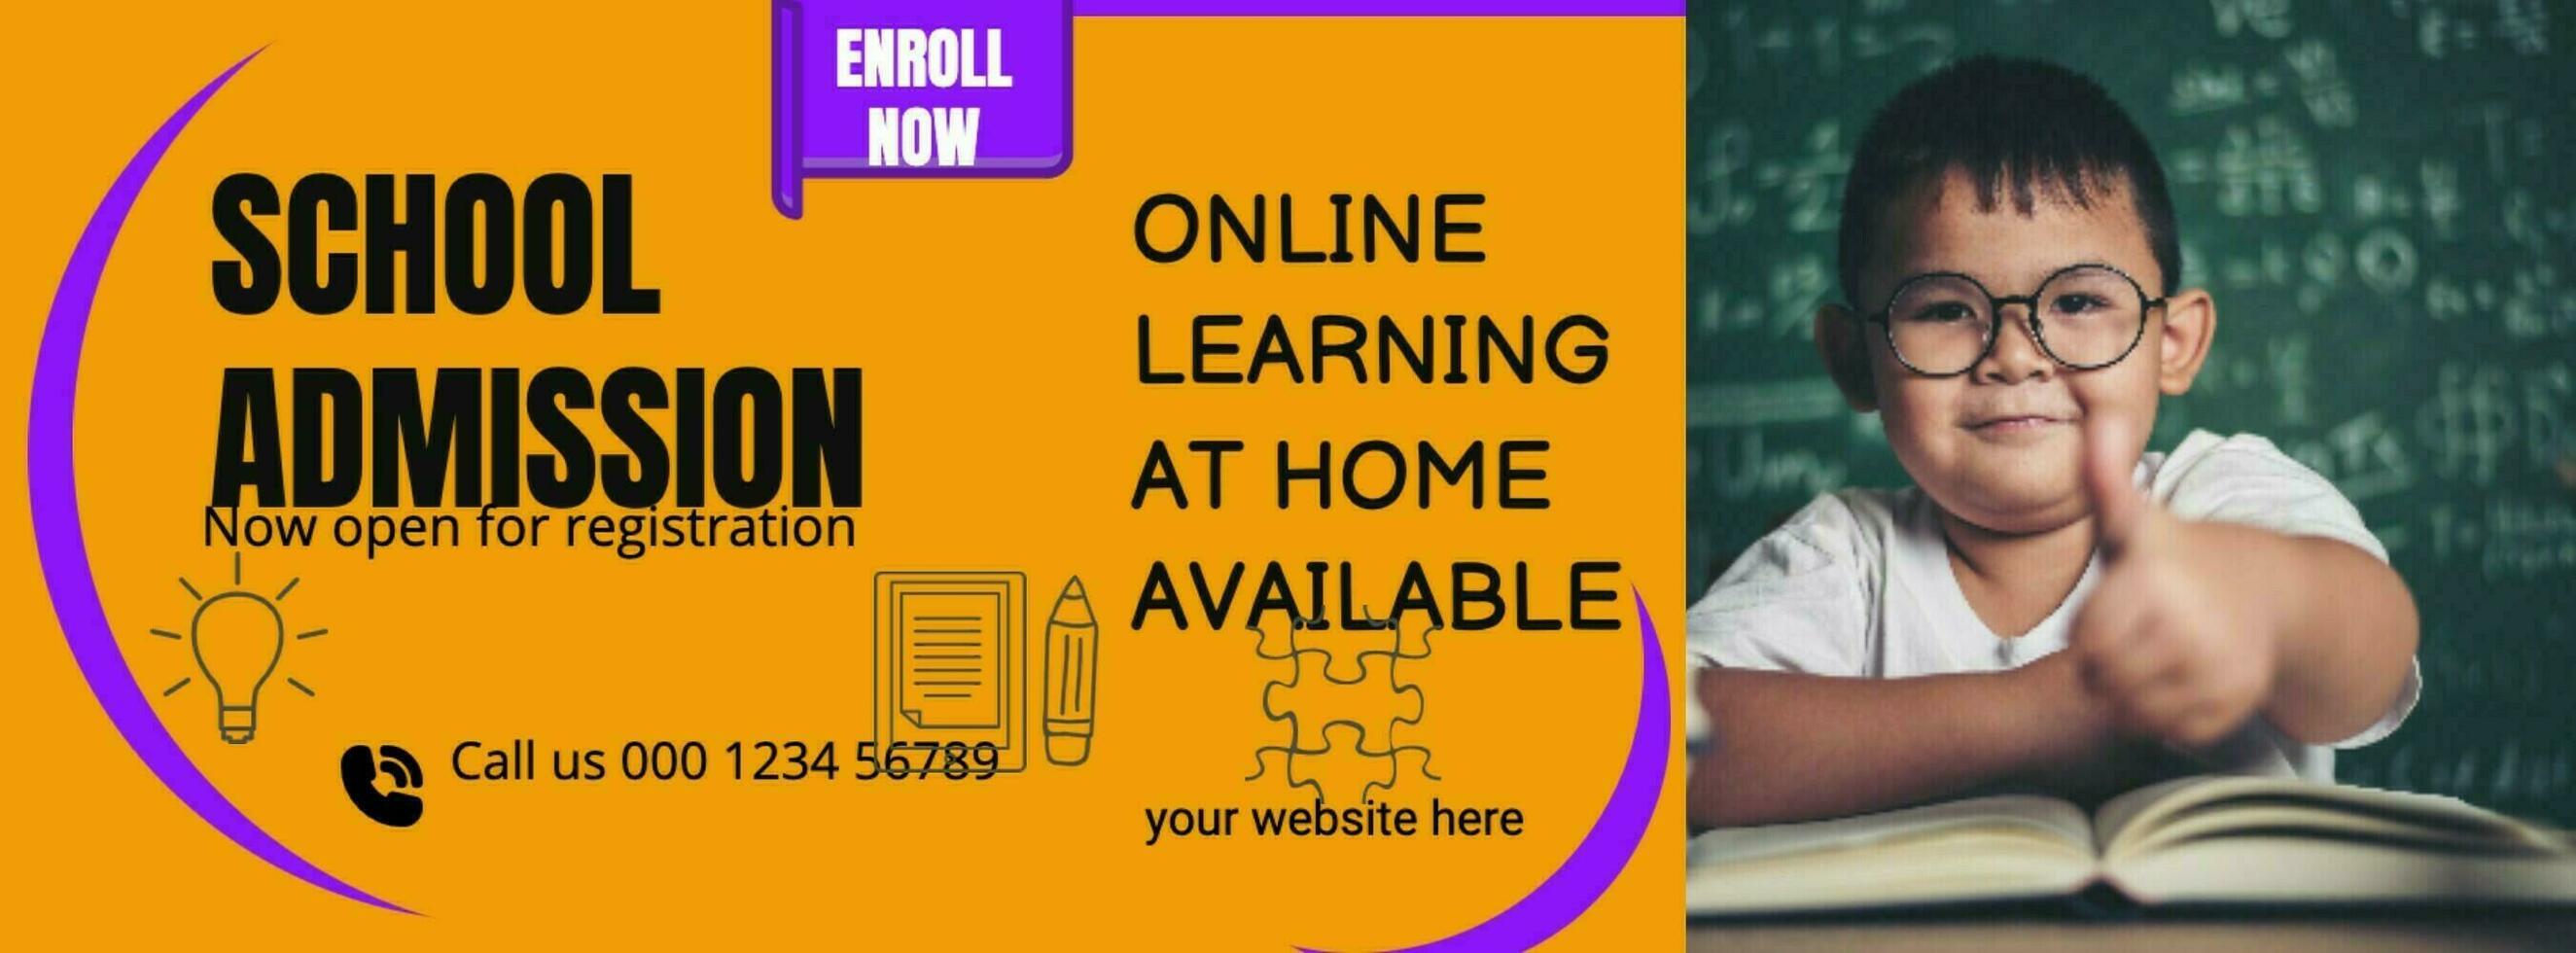 School admission with online learning template